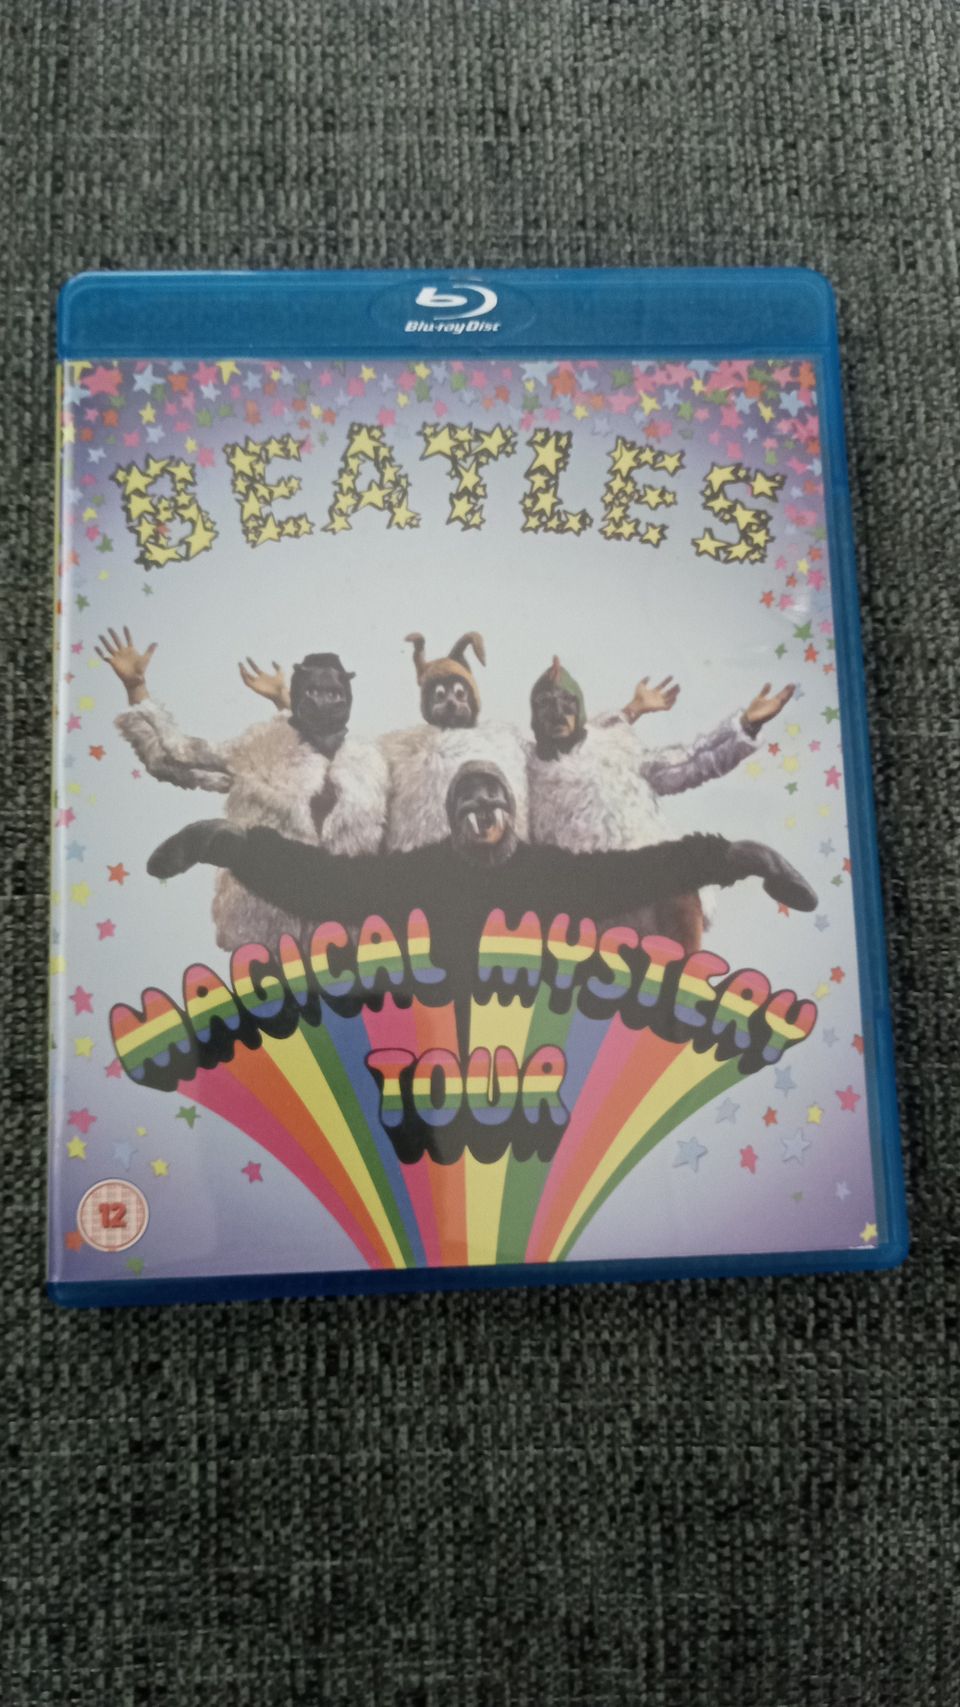 The Beatles - Magical mystery tour Blu-ray